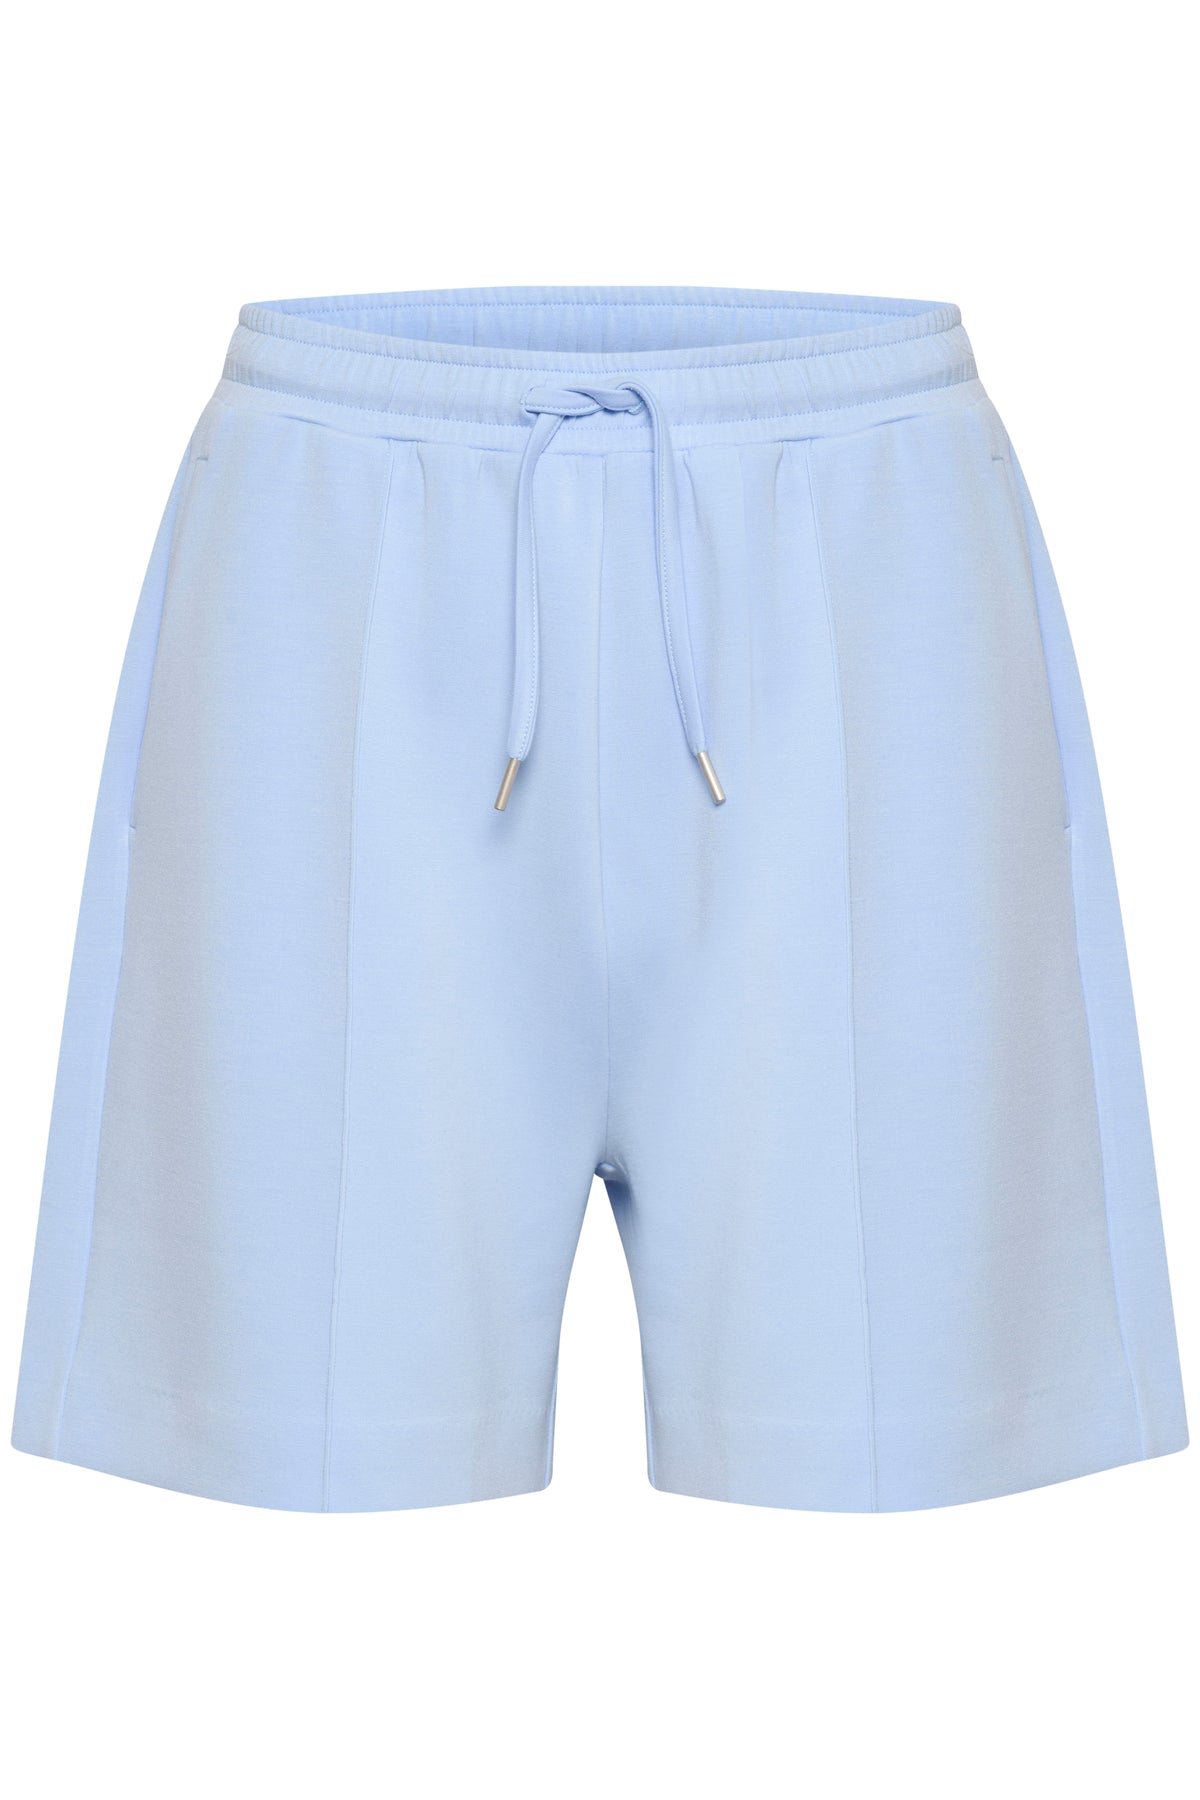 InWear Ester Windsurfer Modal Sports Luxe Relaxed Fit Shorts, 30109370